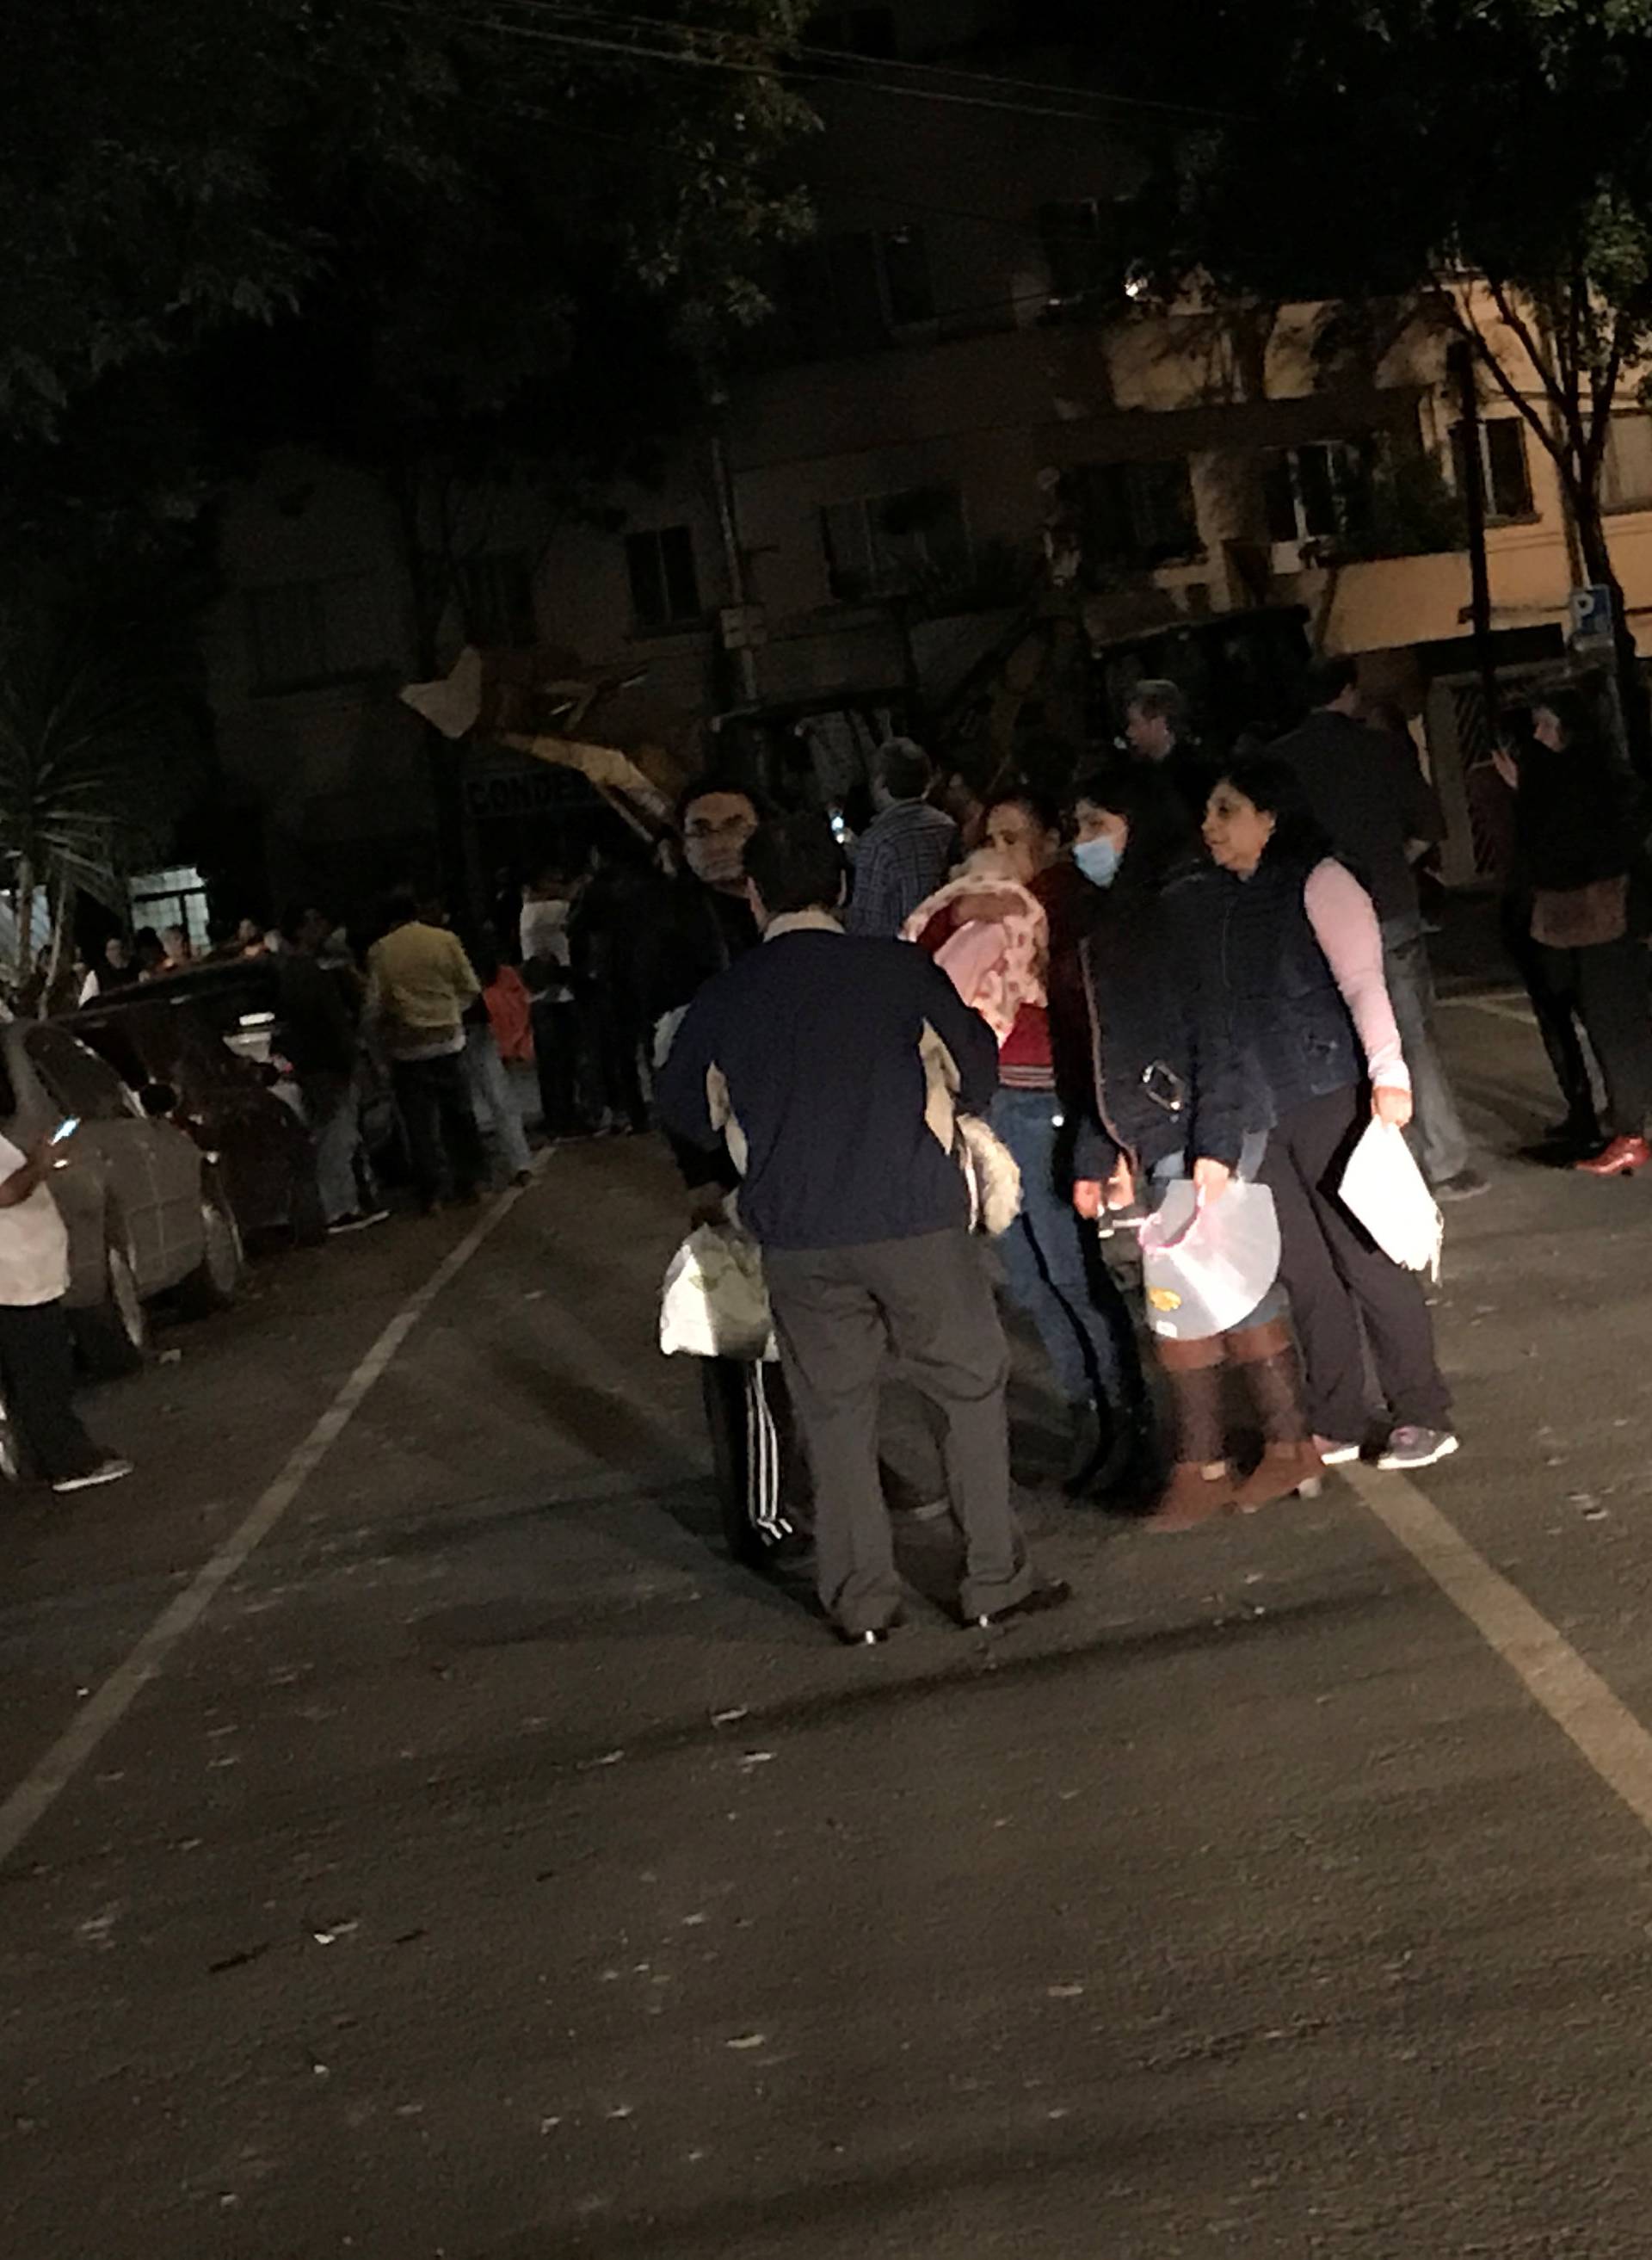 People gather on a street after an earthquake hit Mexico City